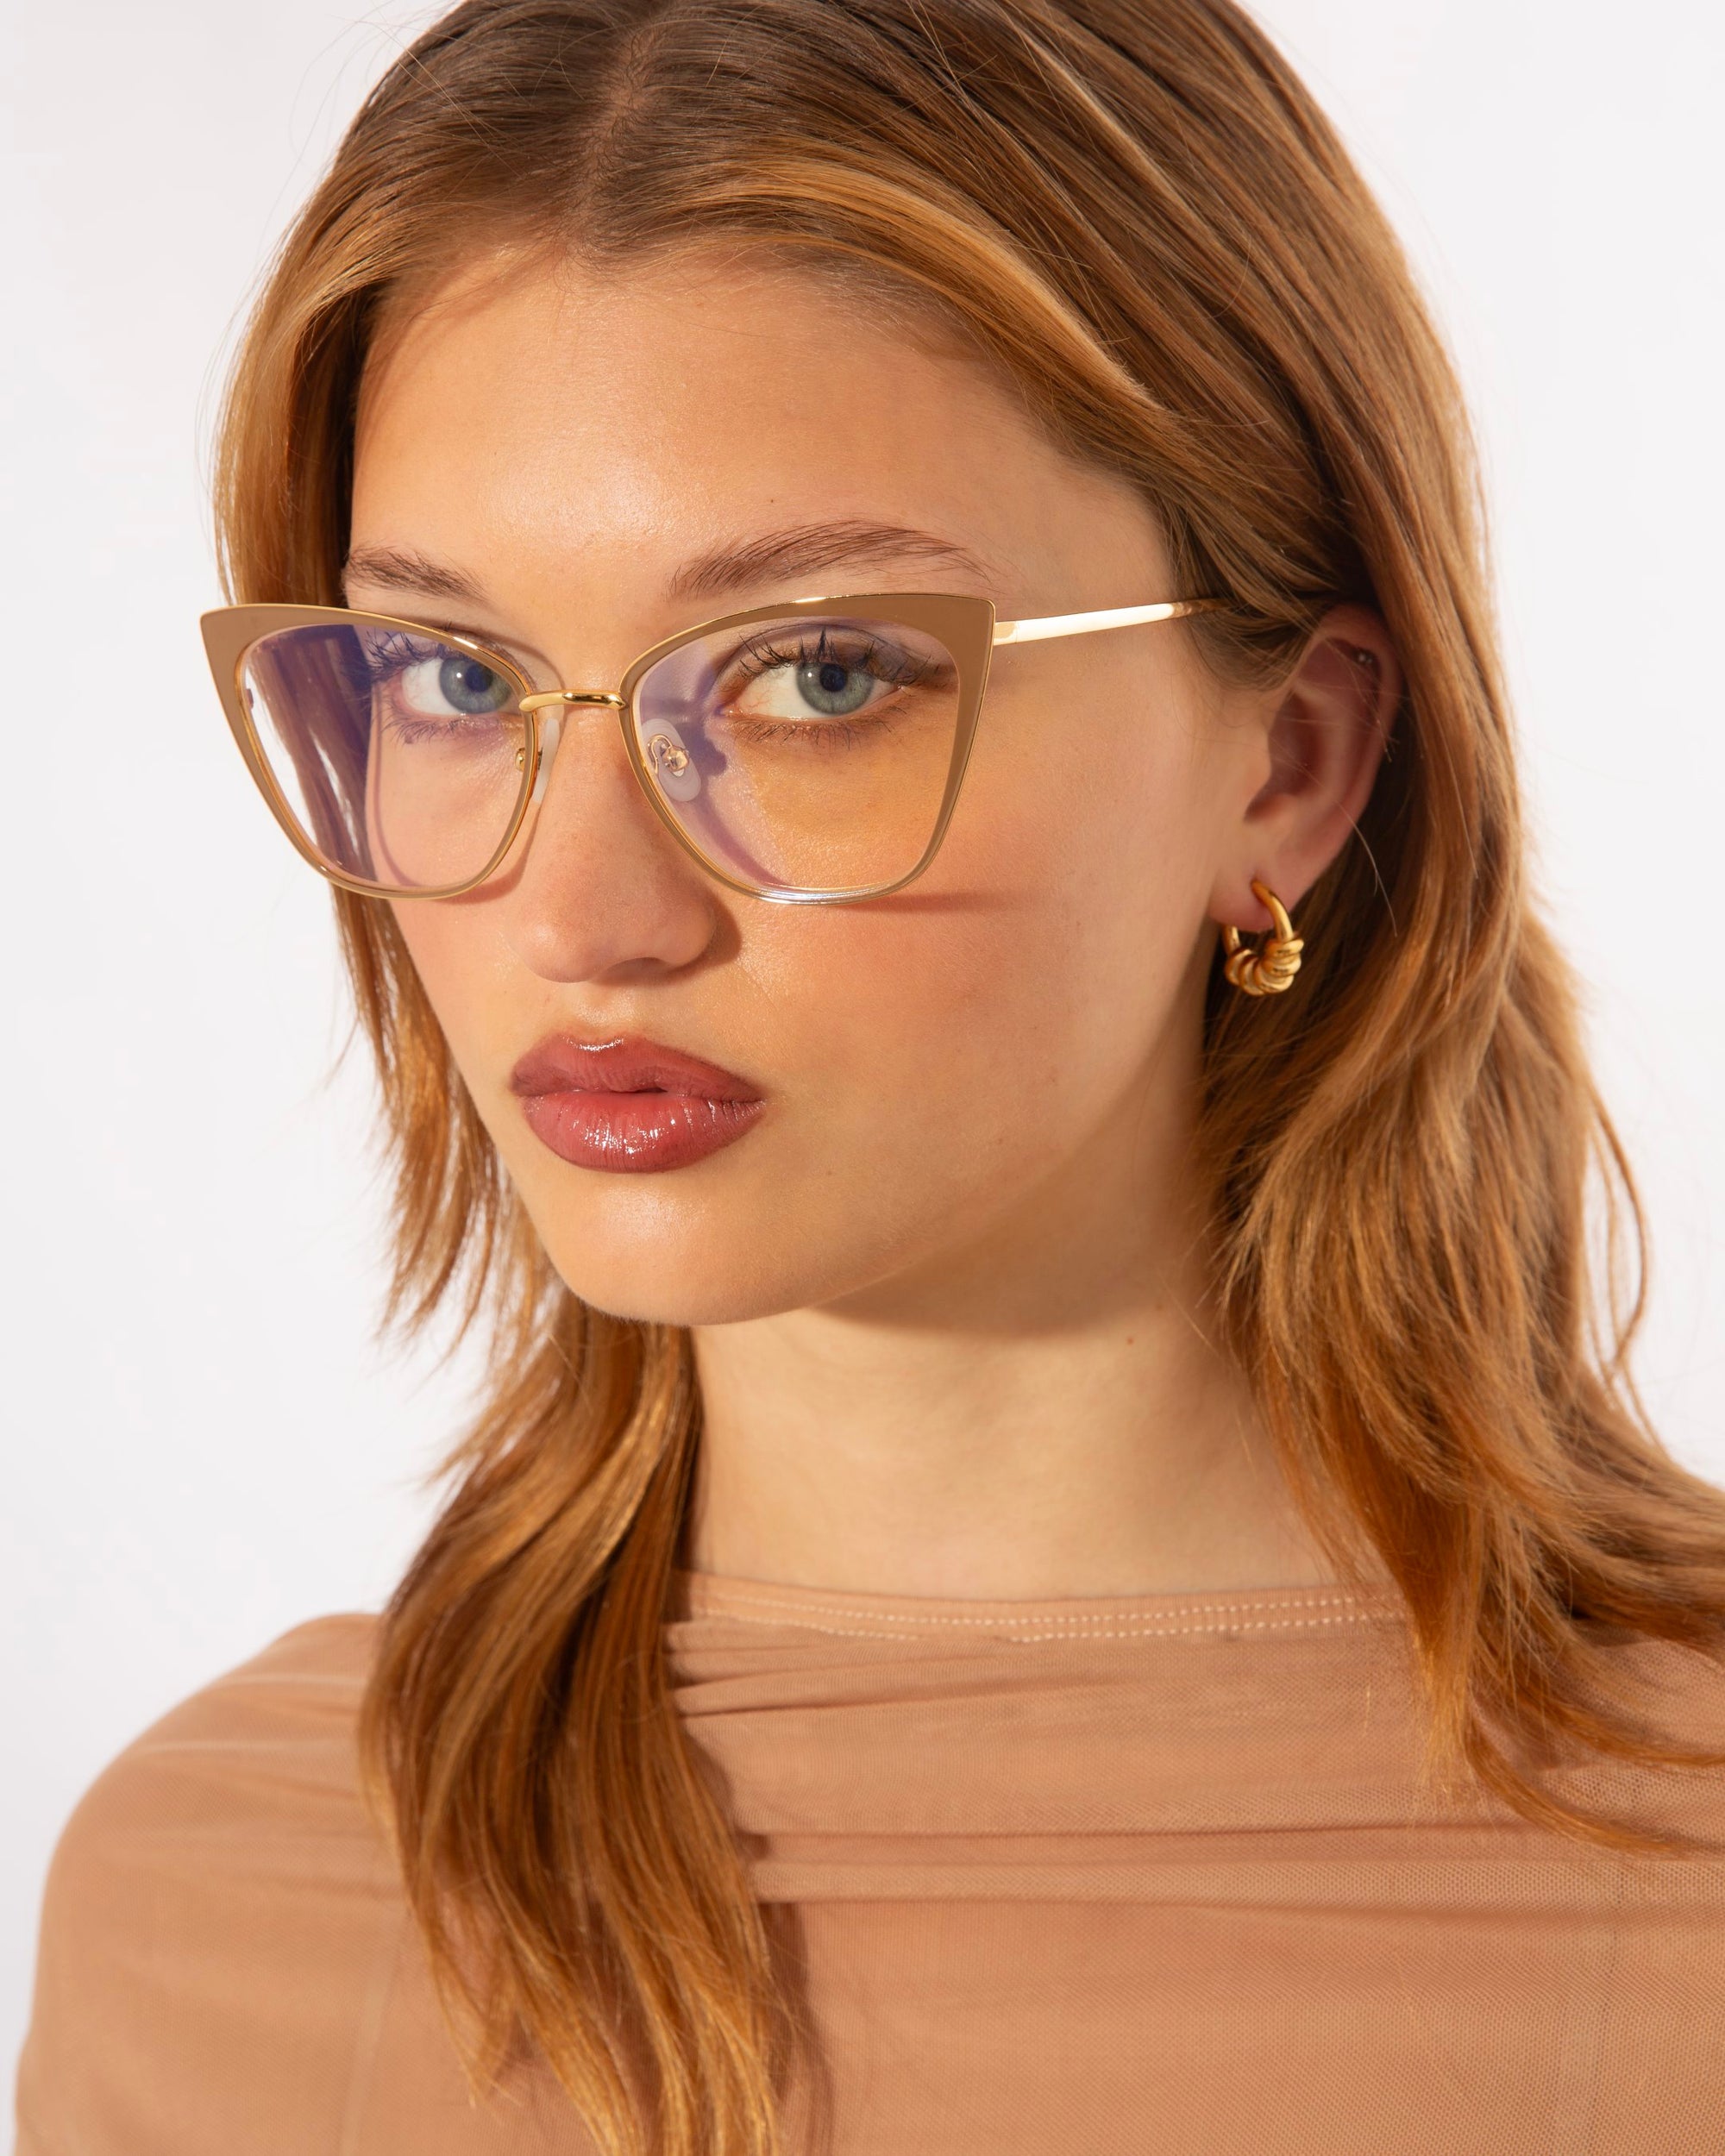 A young woman with light brown hair and wearing glasses looks directly at the camera. Her *Stella Two* glasses by *For Art's Sake®*, adorned with a golden frame and featuring blue light filter lenses, complement her small 14kt gold-plated hoop earrings. She is dressed in a sheer beige top, standing against a plain white background.